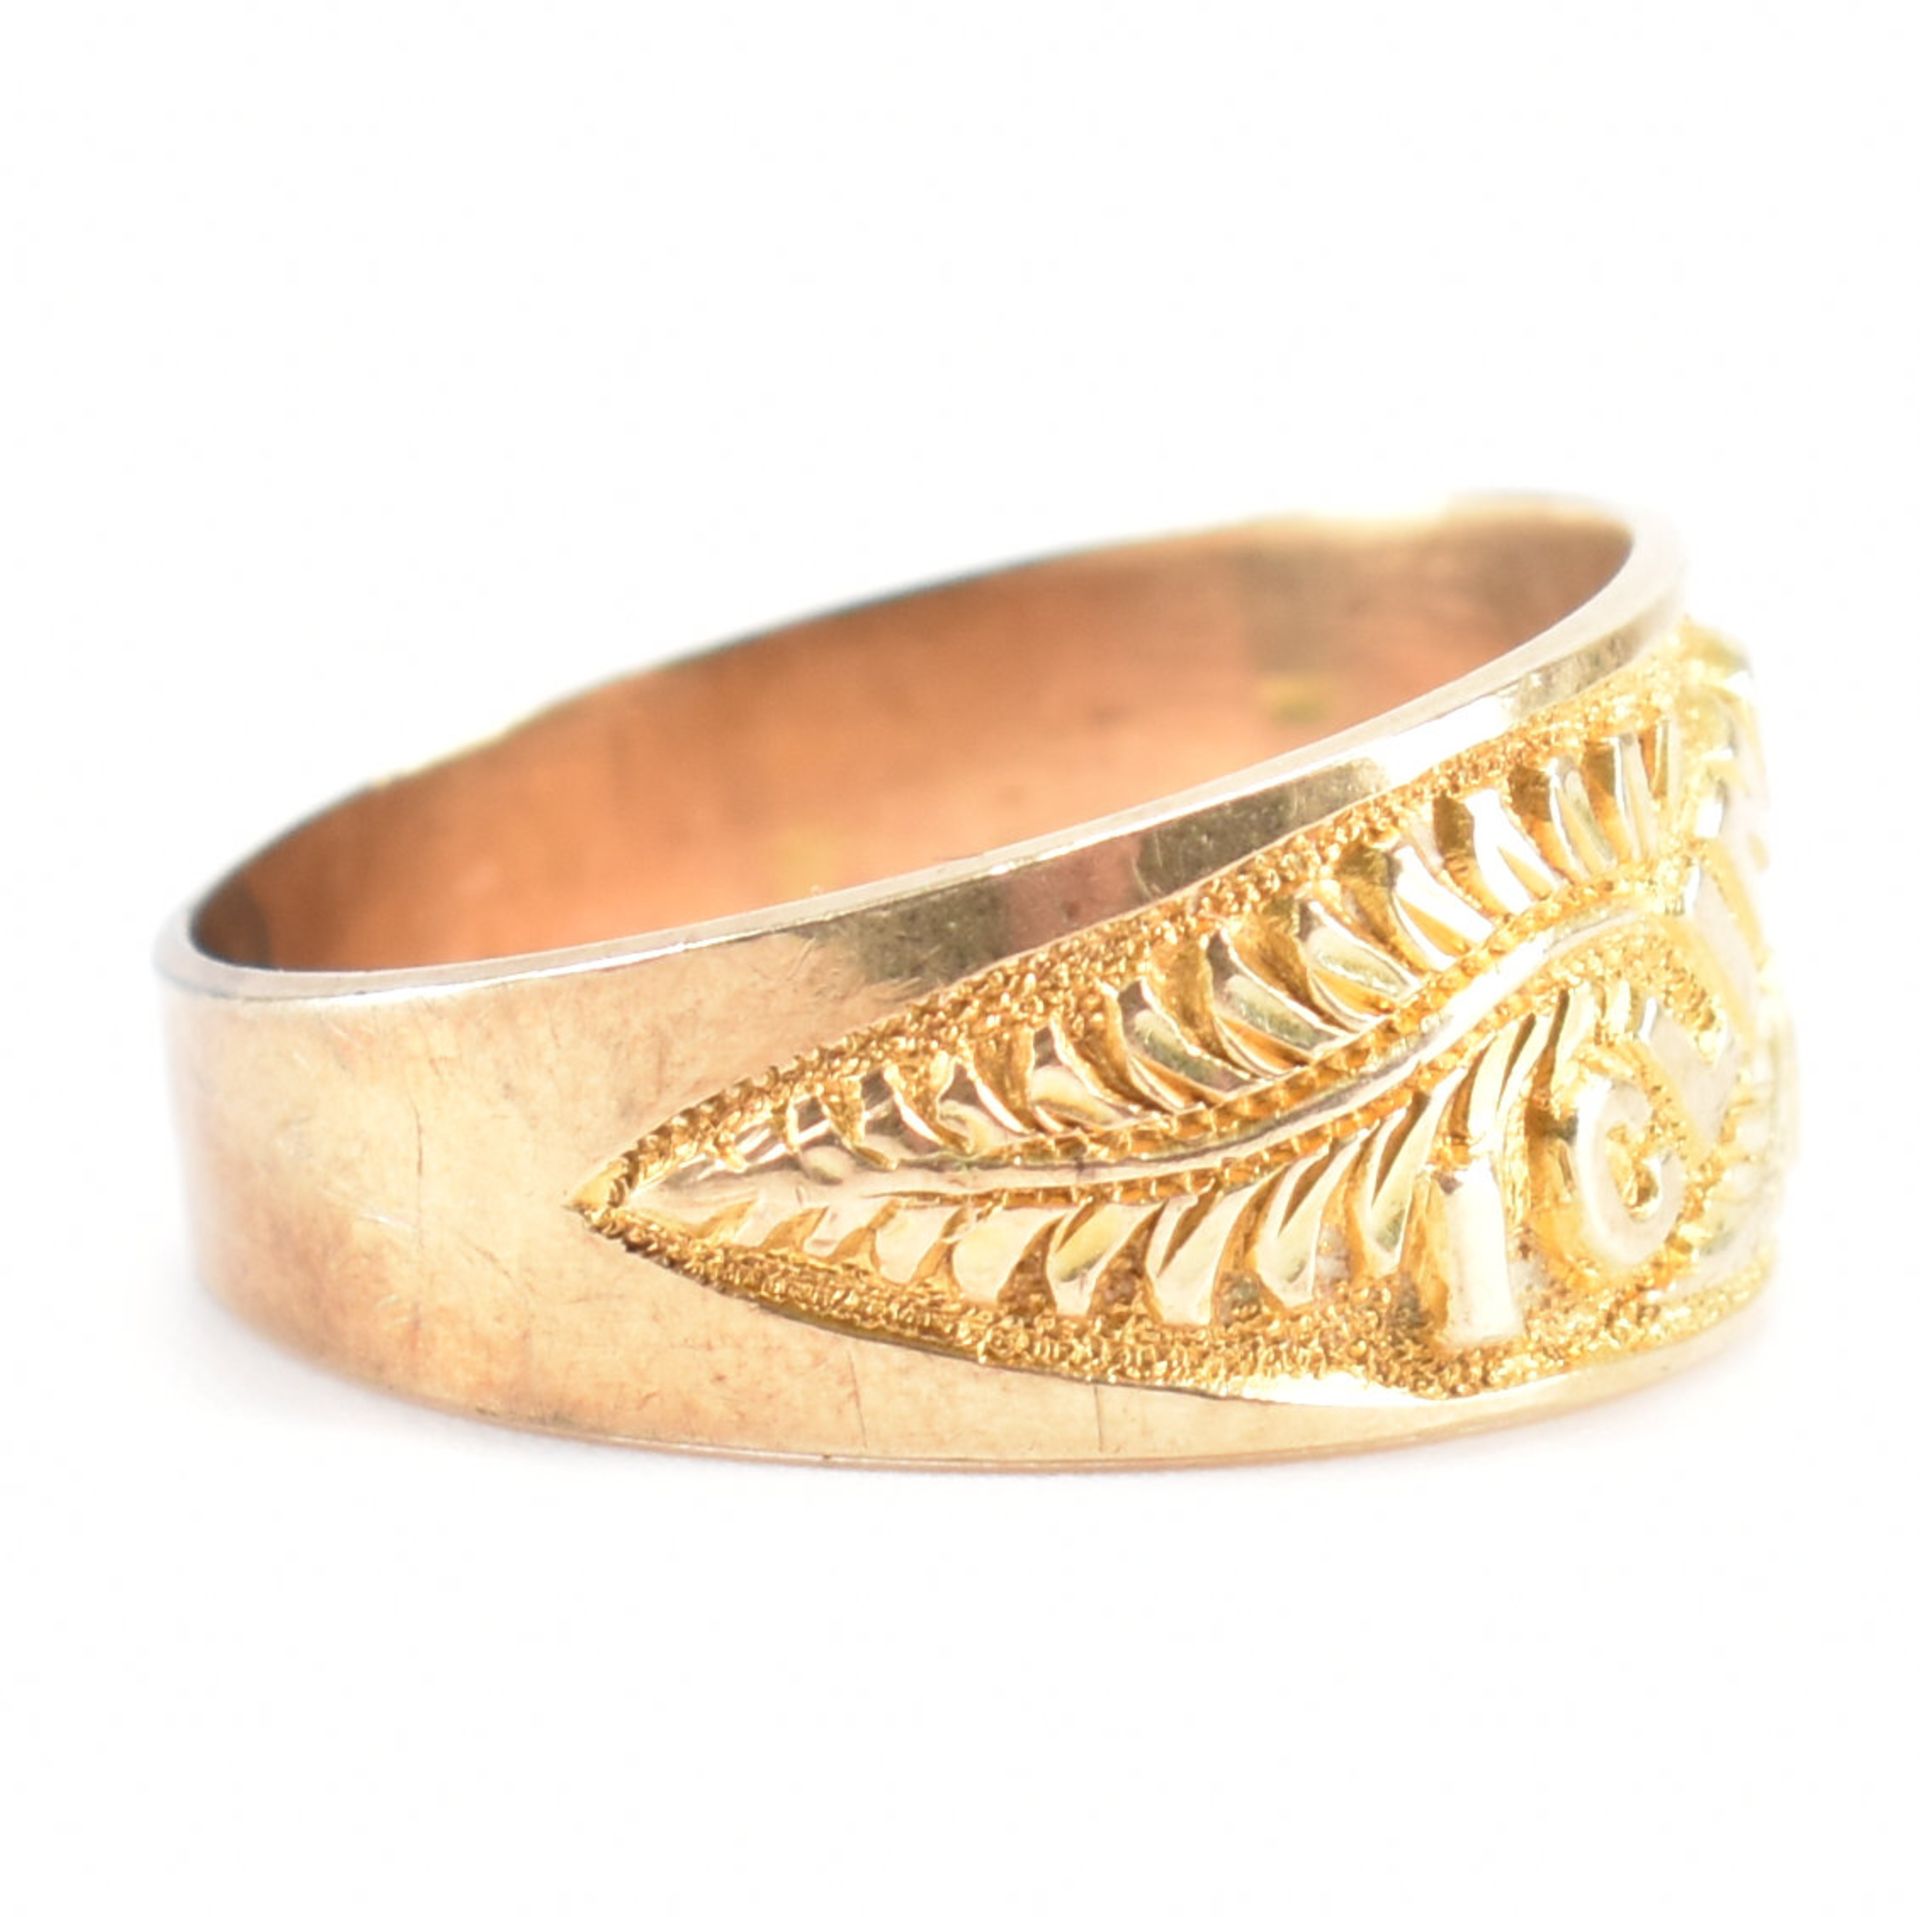 HALLMARKED VICTORIAN 9CT GOLD ETCHED BAND RING - Image 6 of 8